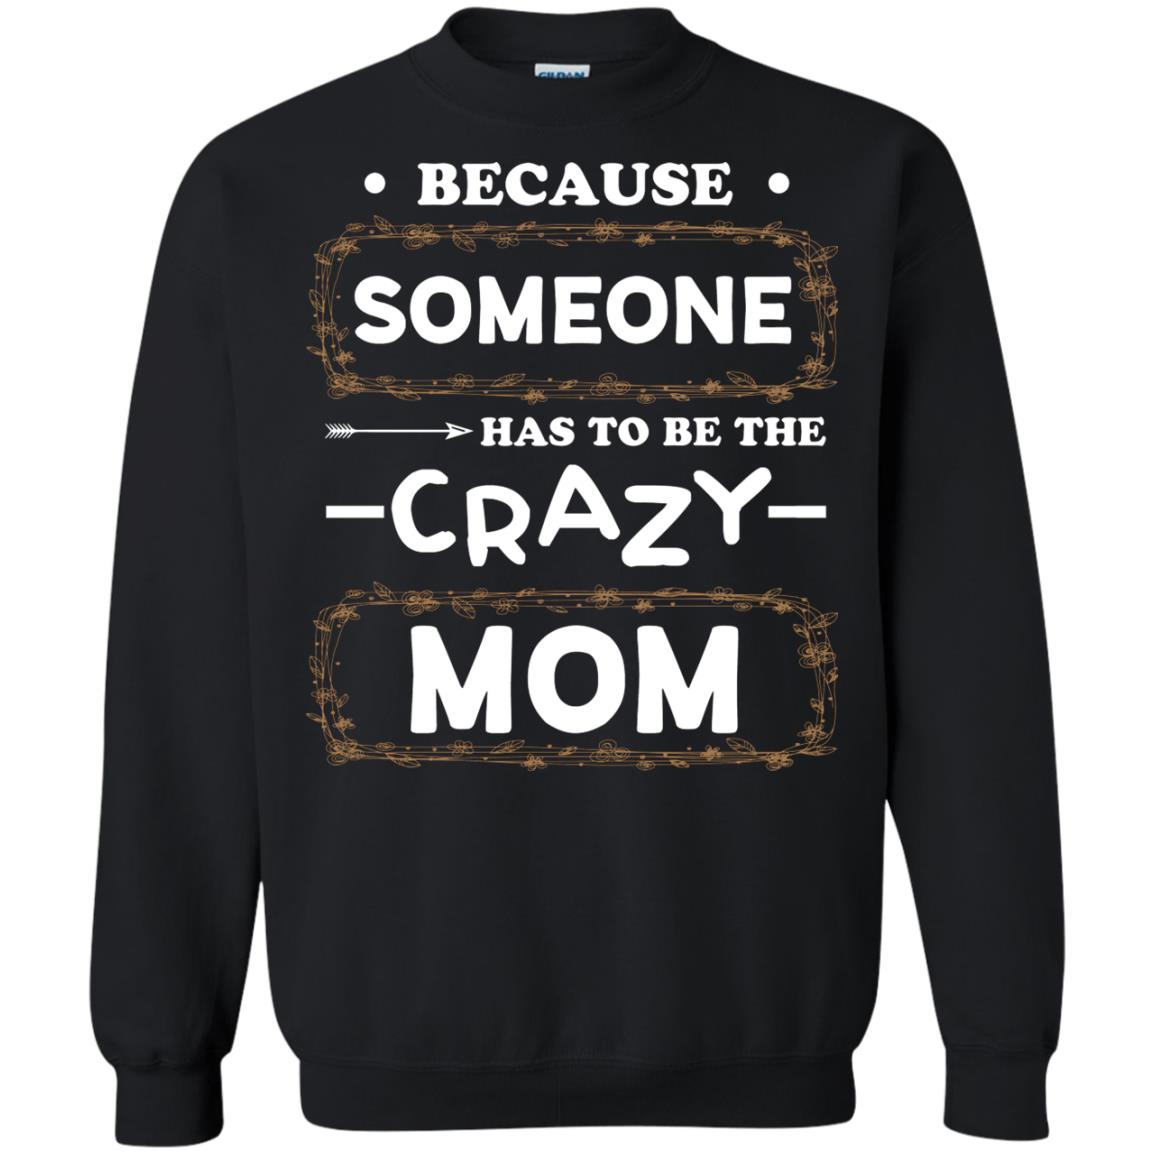 Because Someone Has To Be The Crazy Mom Shirt For MommyG180 Gildan Crewneck Pullover Sweatshirt 8 oz.